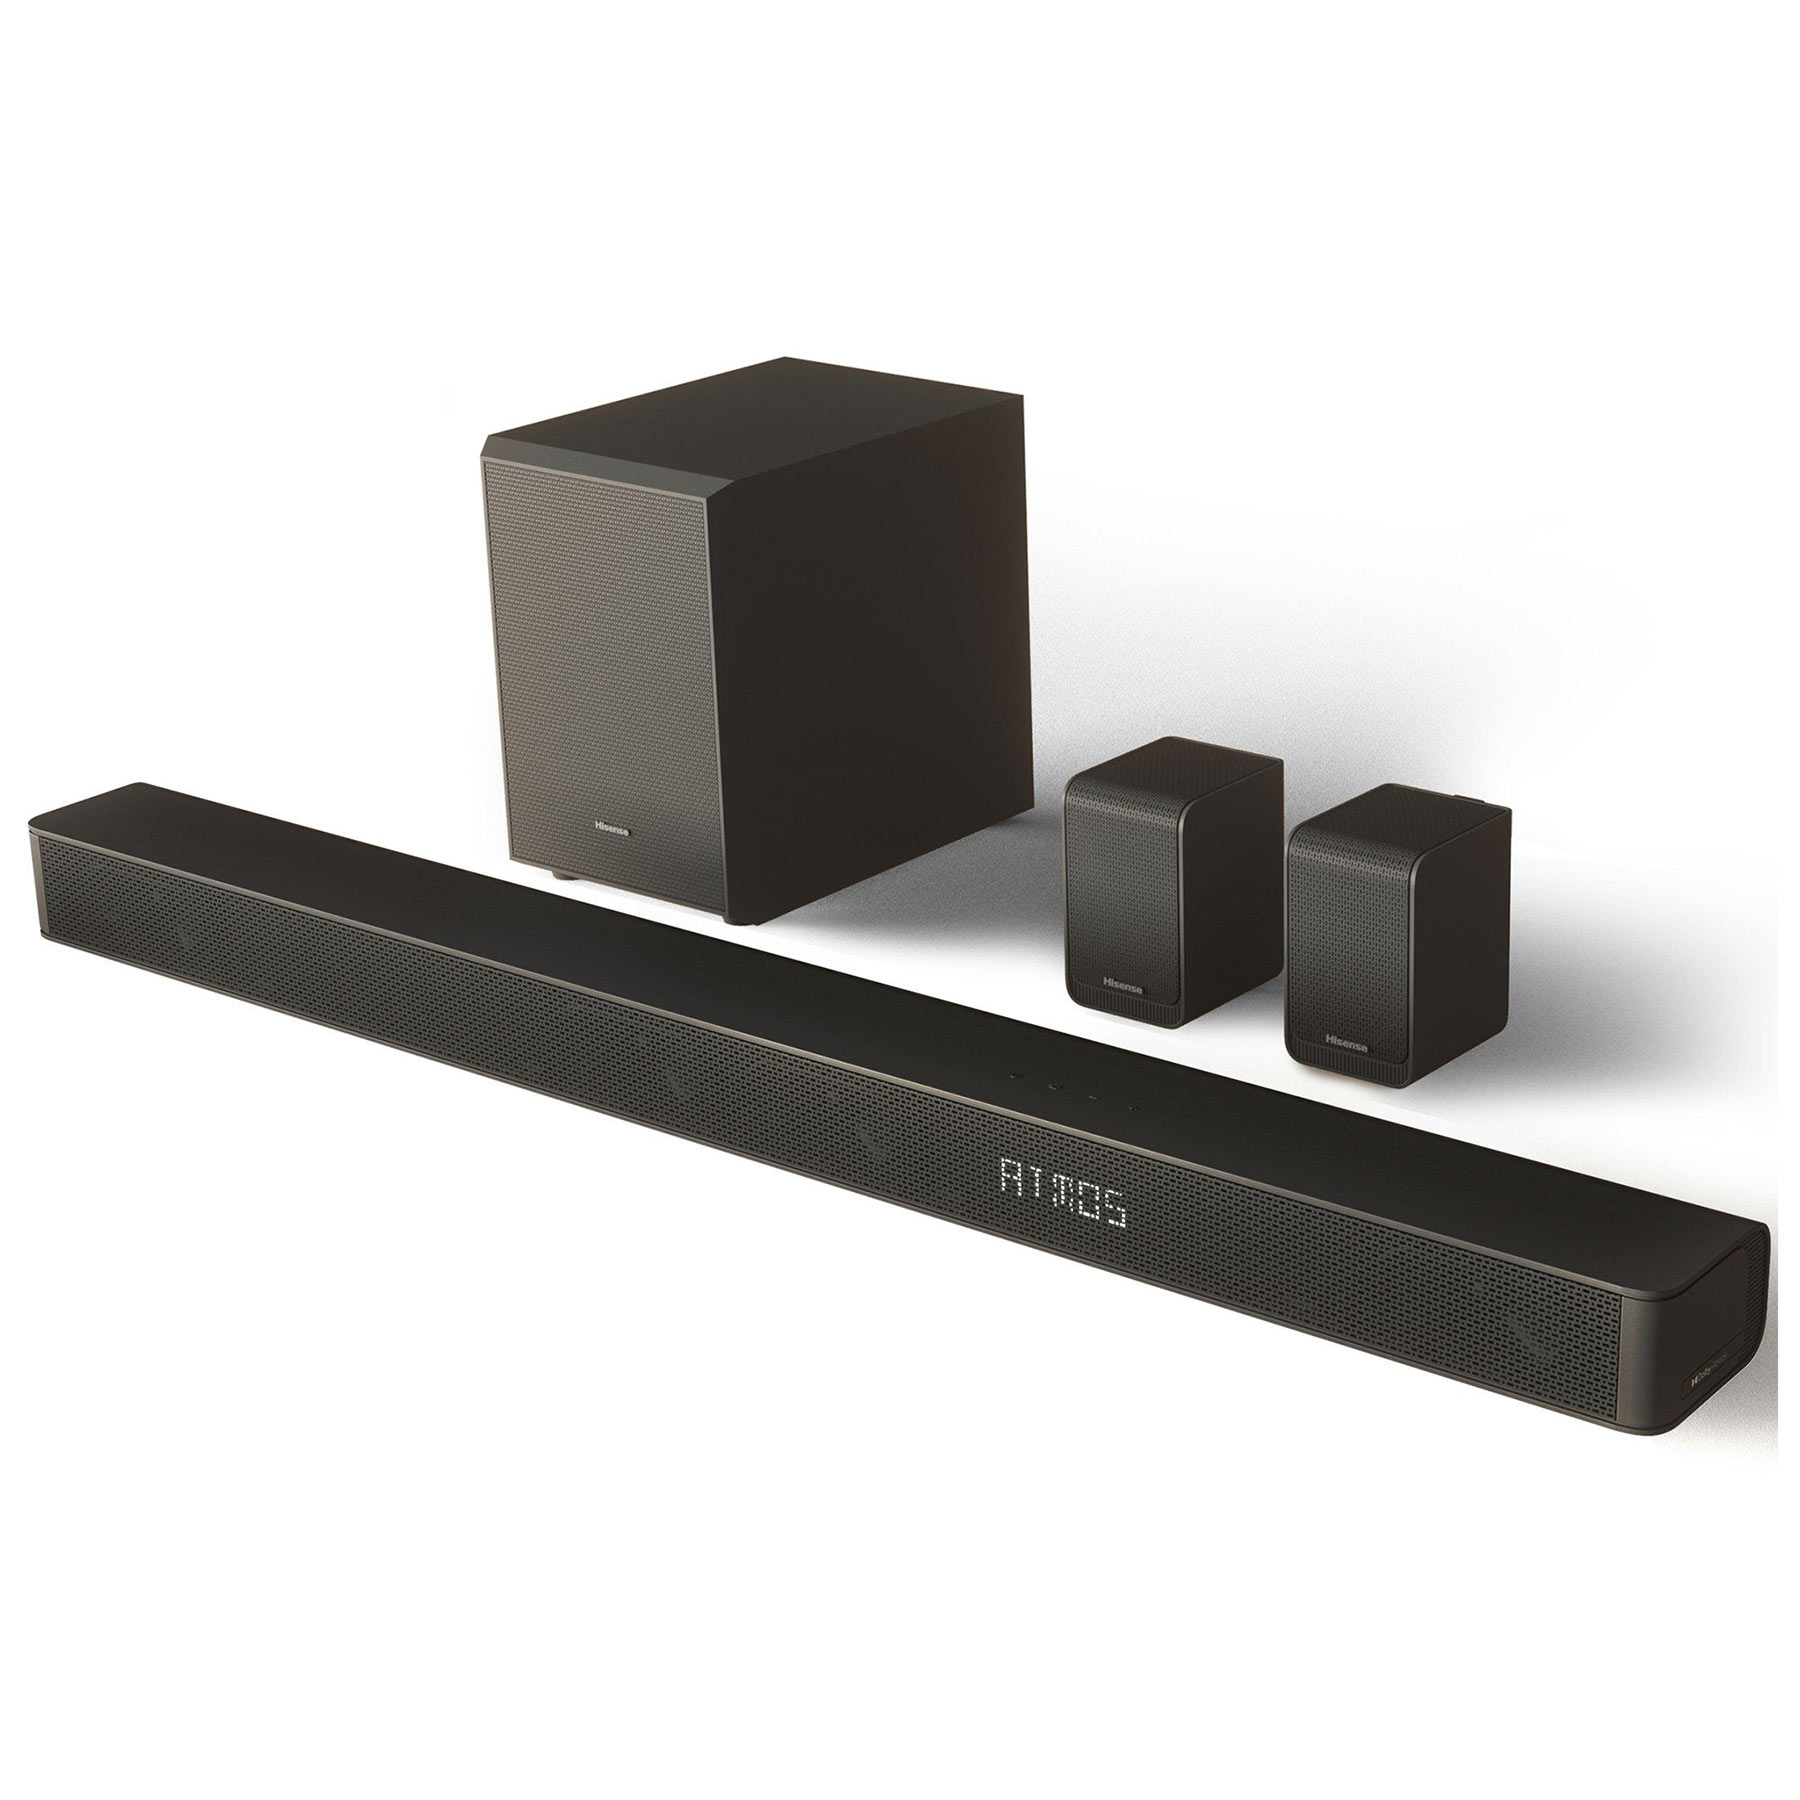 Image of Hisense AX5100G 5 1Ch Dolby Atmos Soundbar Subwoofer Rear Speakers